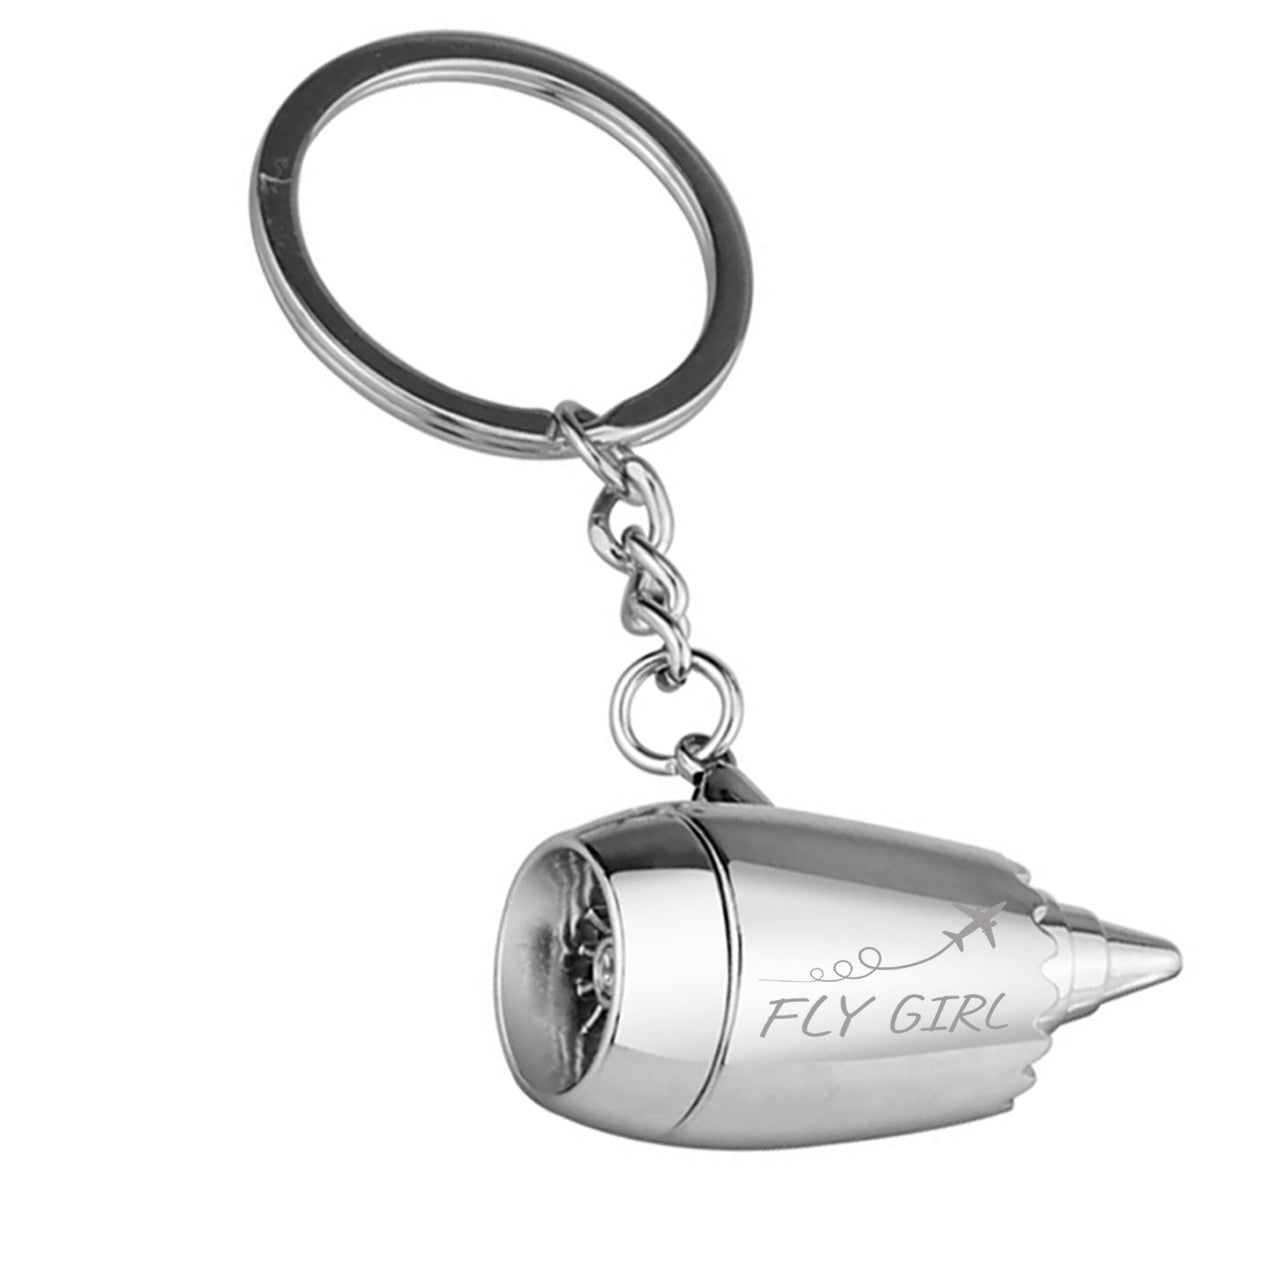 Just Fly It & Fly Girl Designed Airplane Jet Engine Shaped Key Chain